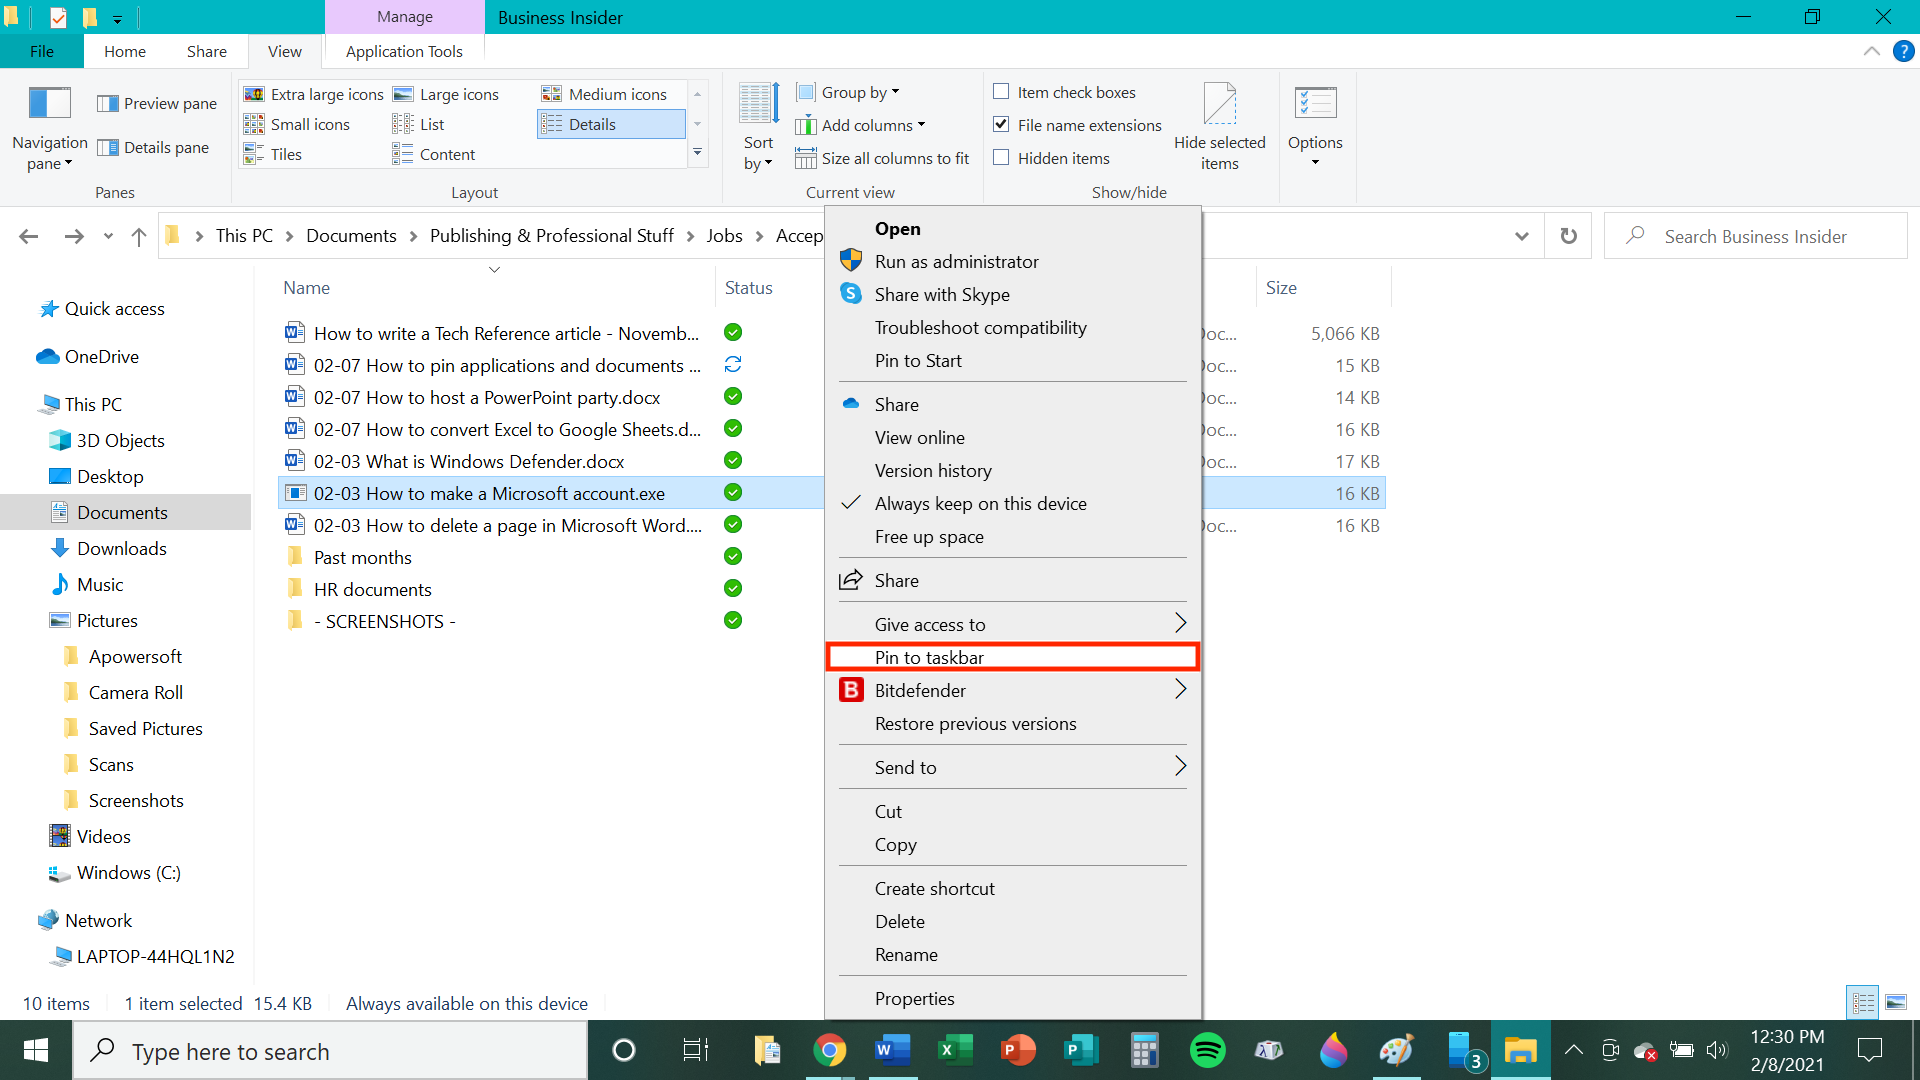 How to pin applications and documents on the Windows taskbar   7